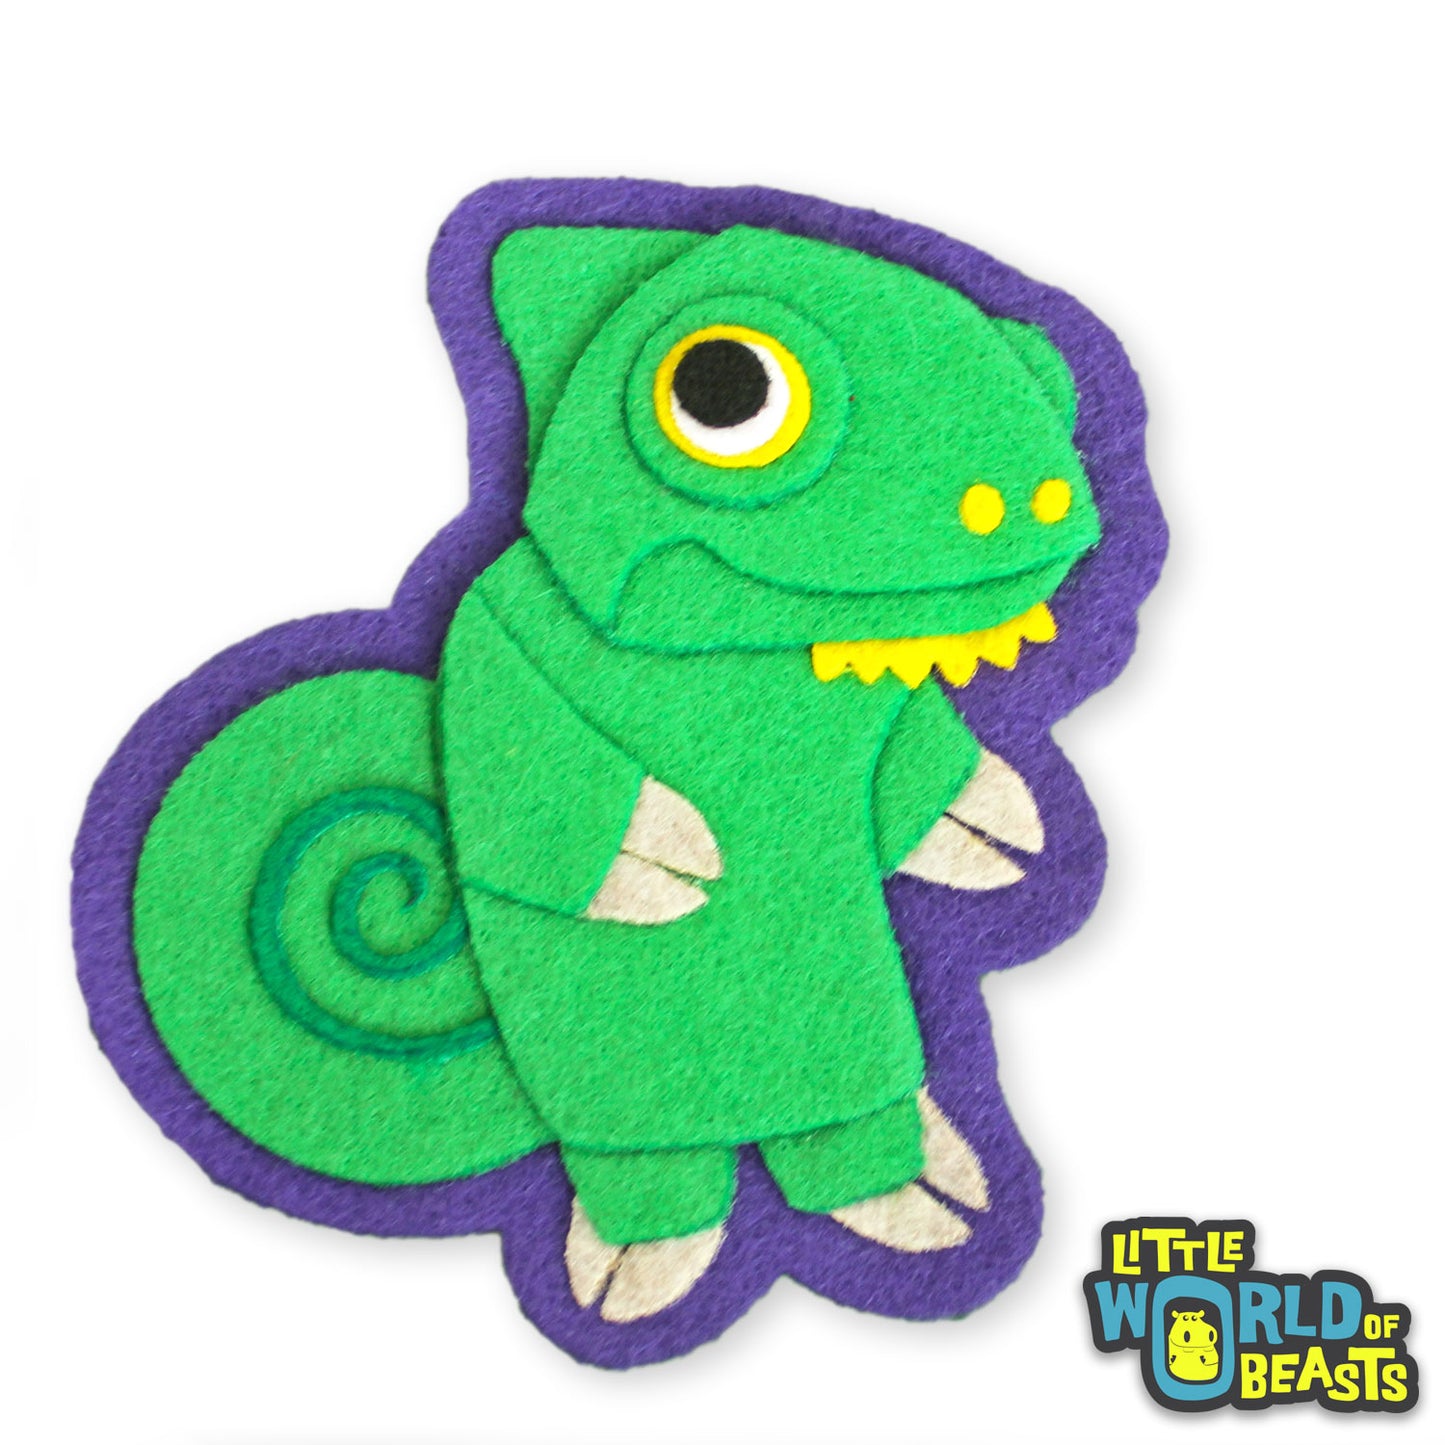 Clover the Veiled Chameleon - Iron On or Sew On Patch - Little World of Beasts